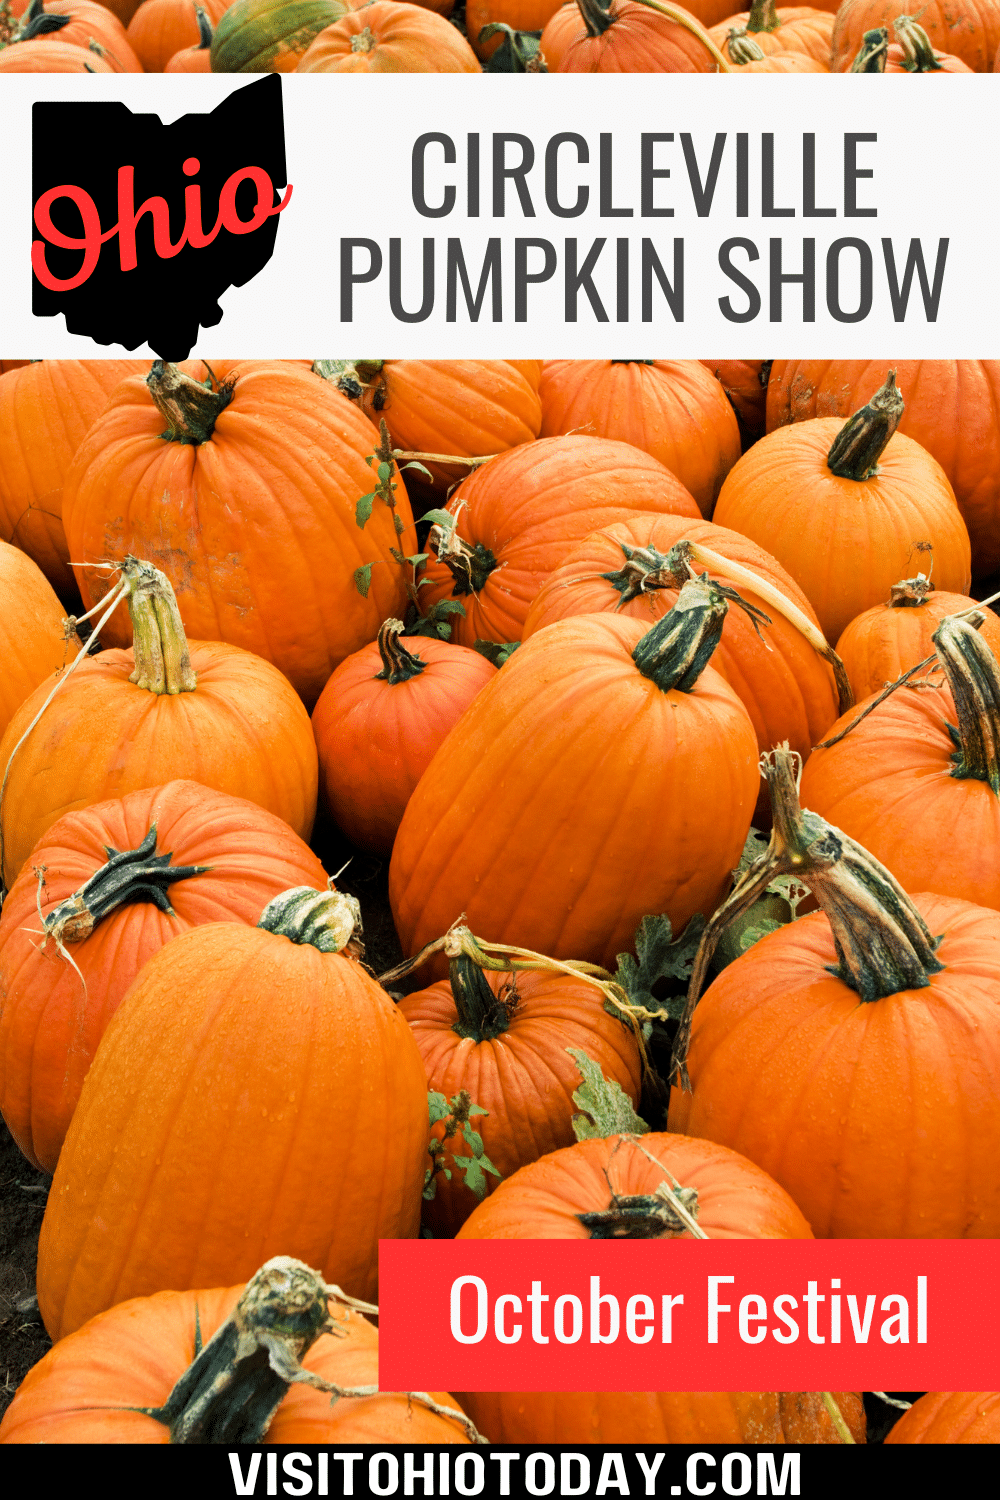 The Circleville Pumpkin Show is held from Wednesday to Saturday, October 18-21, 2023. It is the oldest and largest festival in Ohio. The idea of the show was to bring the country folks and the city folks together. There is no admission charge for this show.